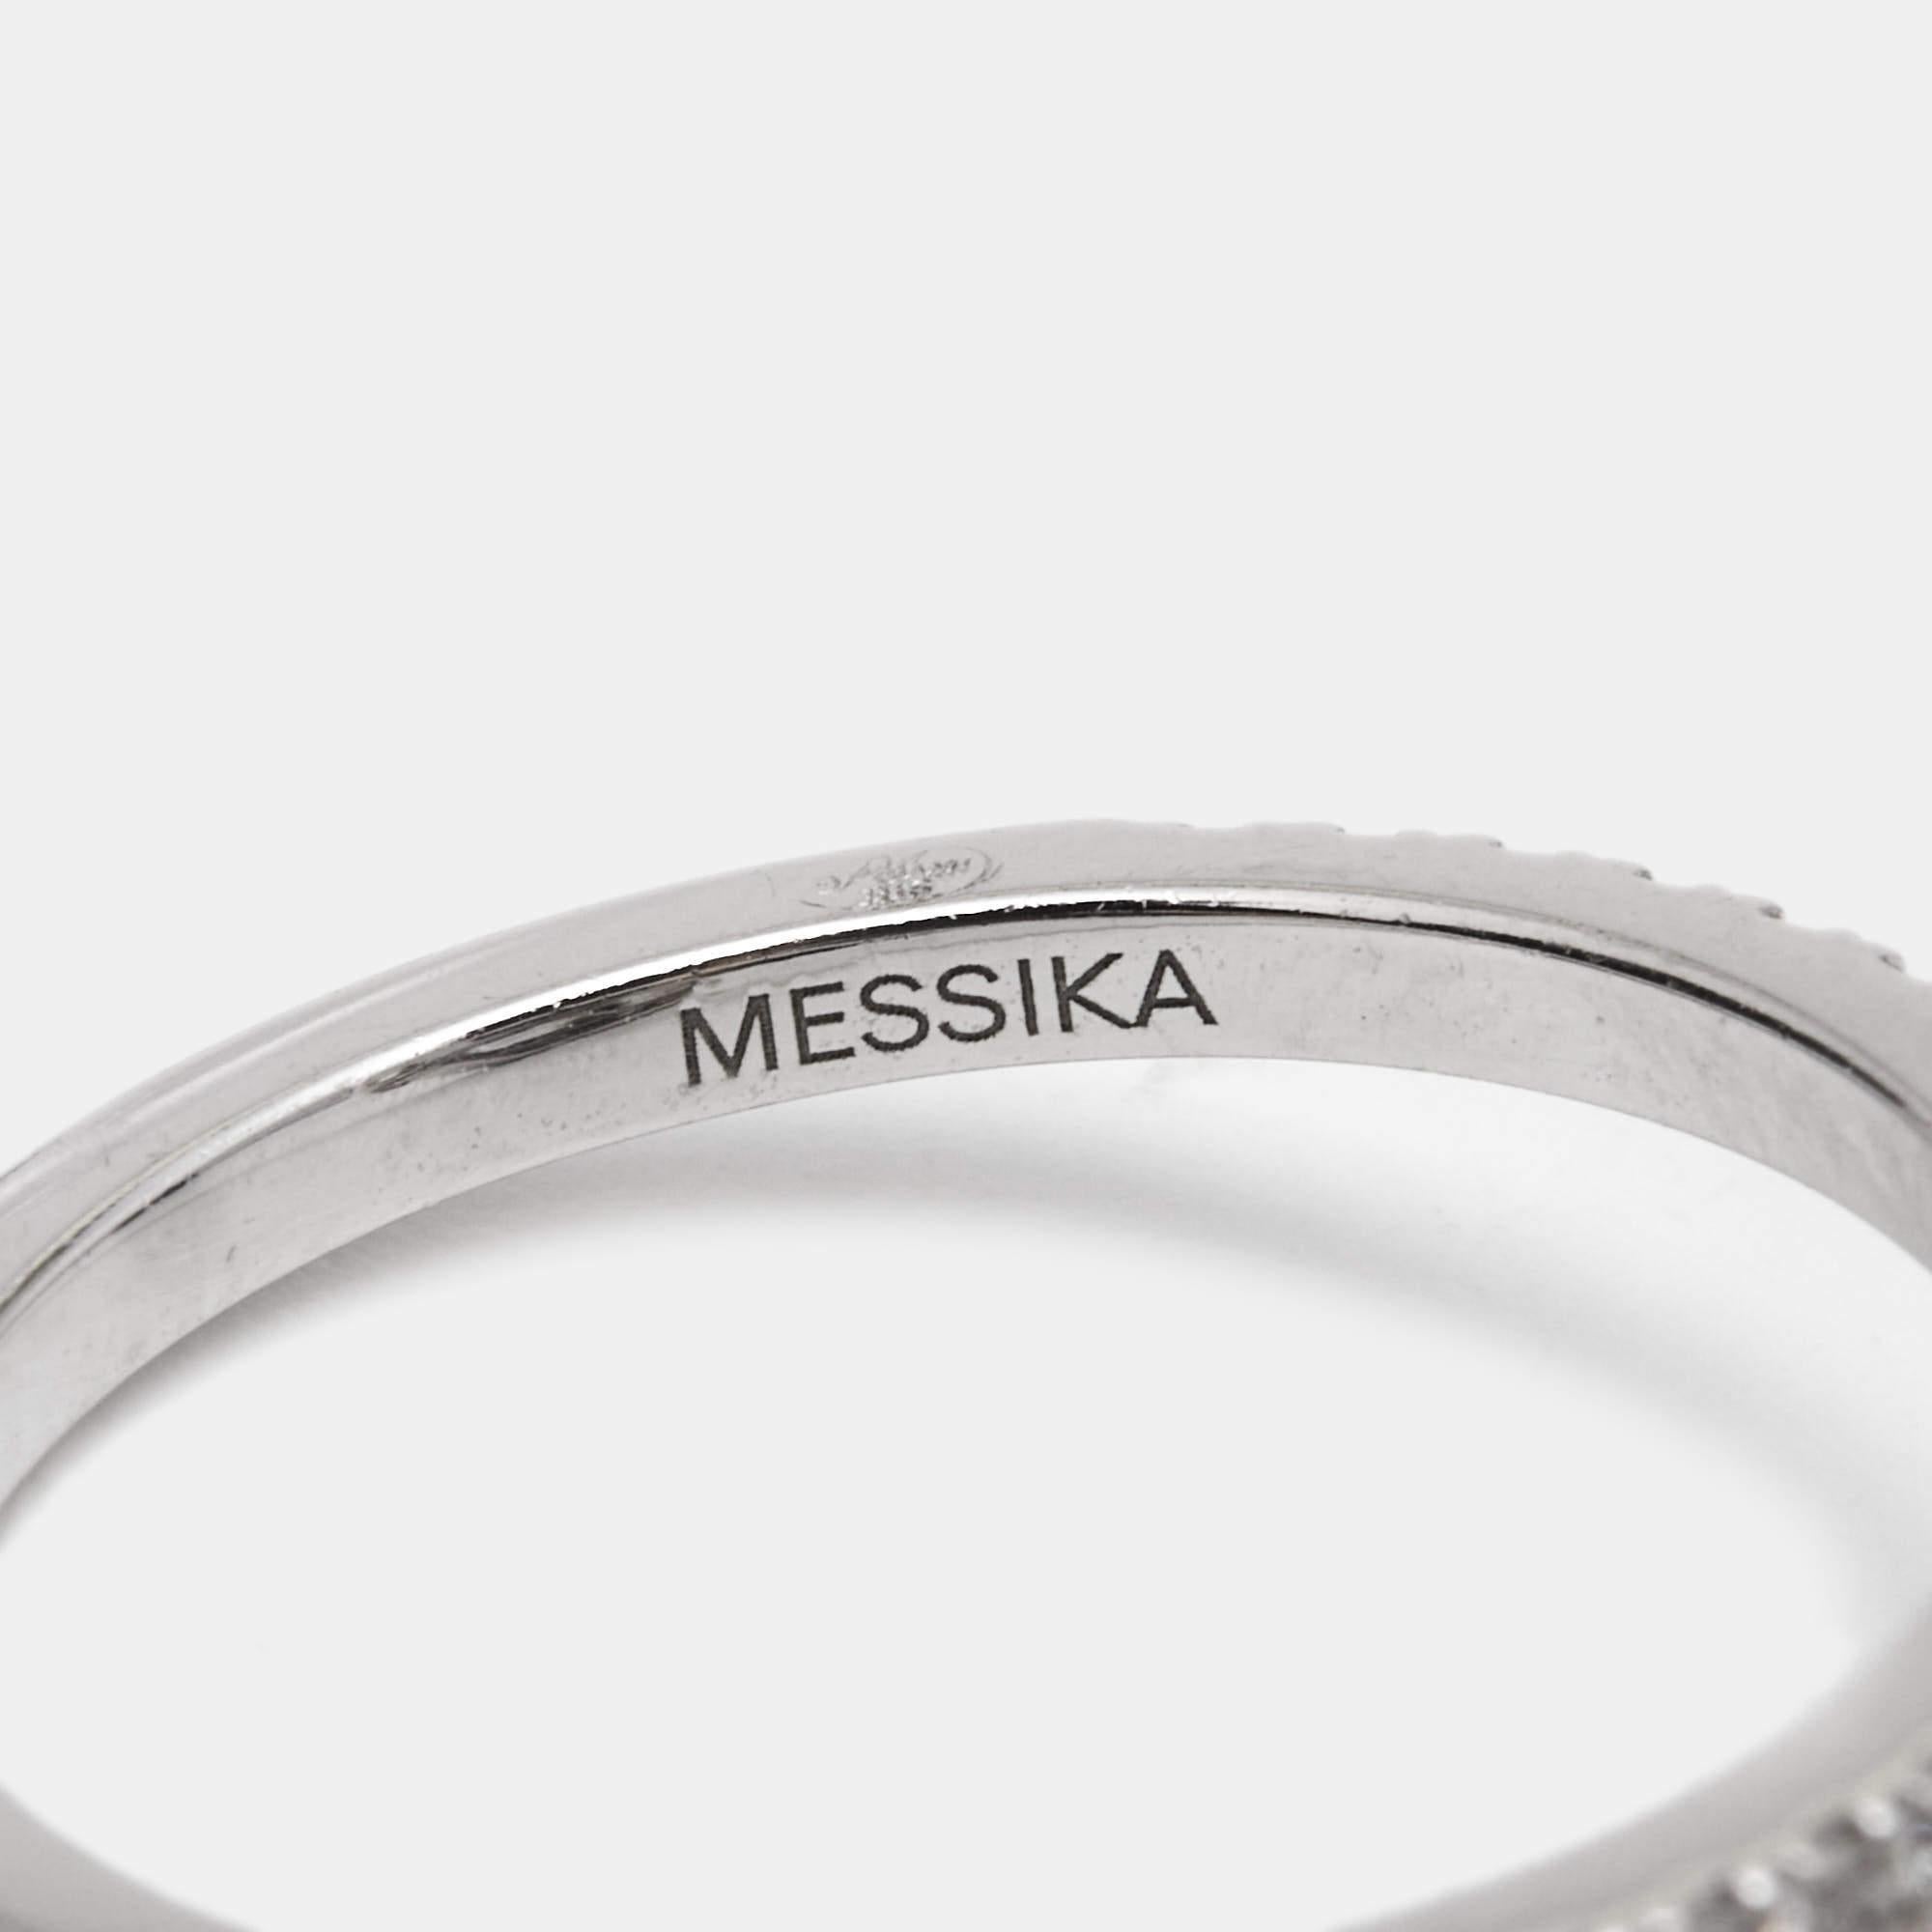 This ring addresses Messika's continued tribute to elegance and timelessness. It is crafted from 18k white gold as a diamond-studded band and added with a stunning cage drop. The ring exudes luxury in full light.

